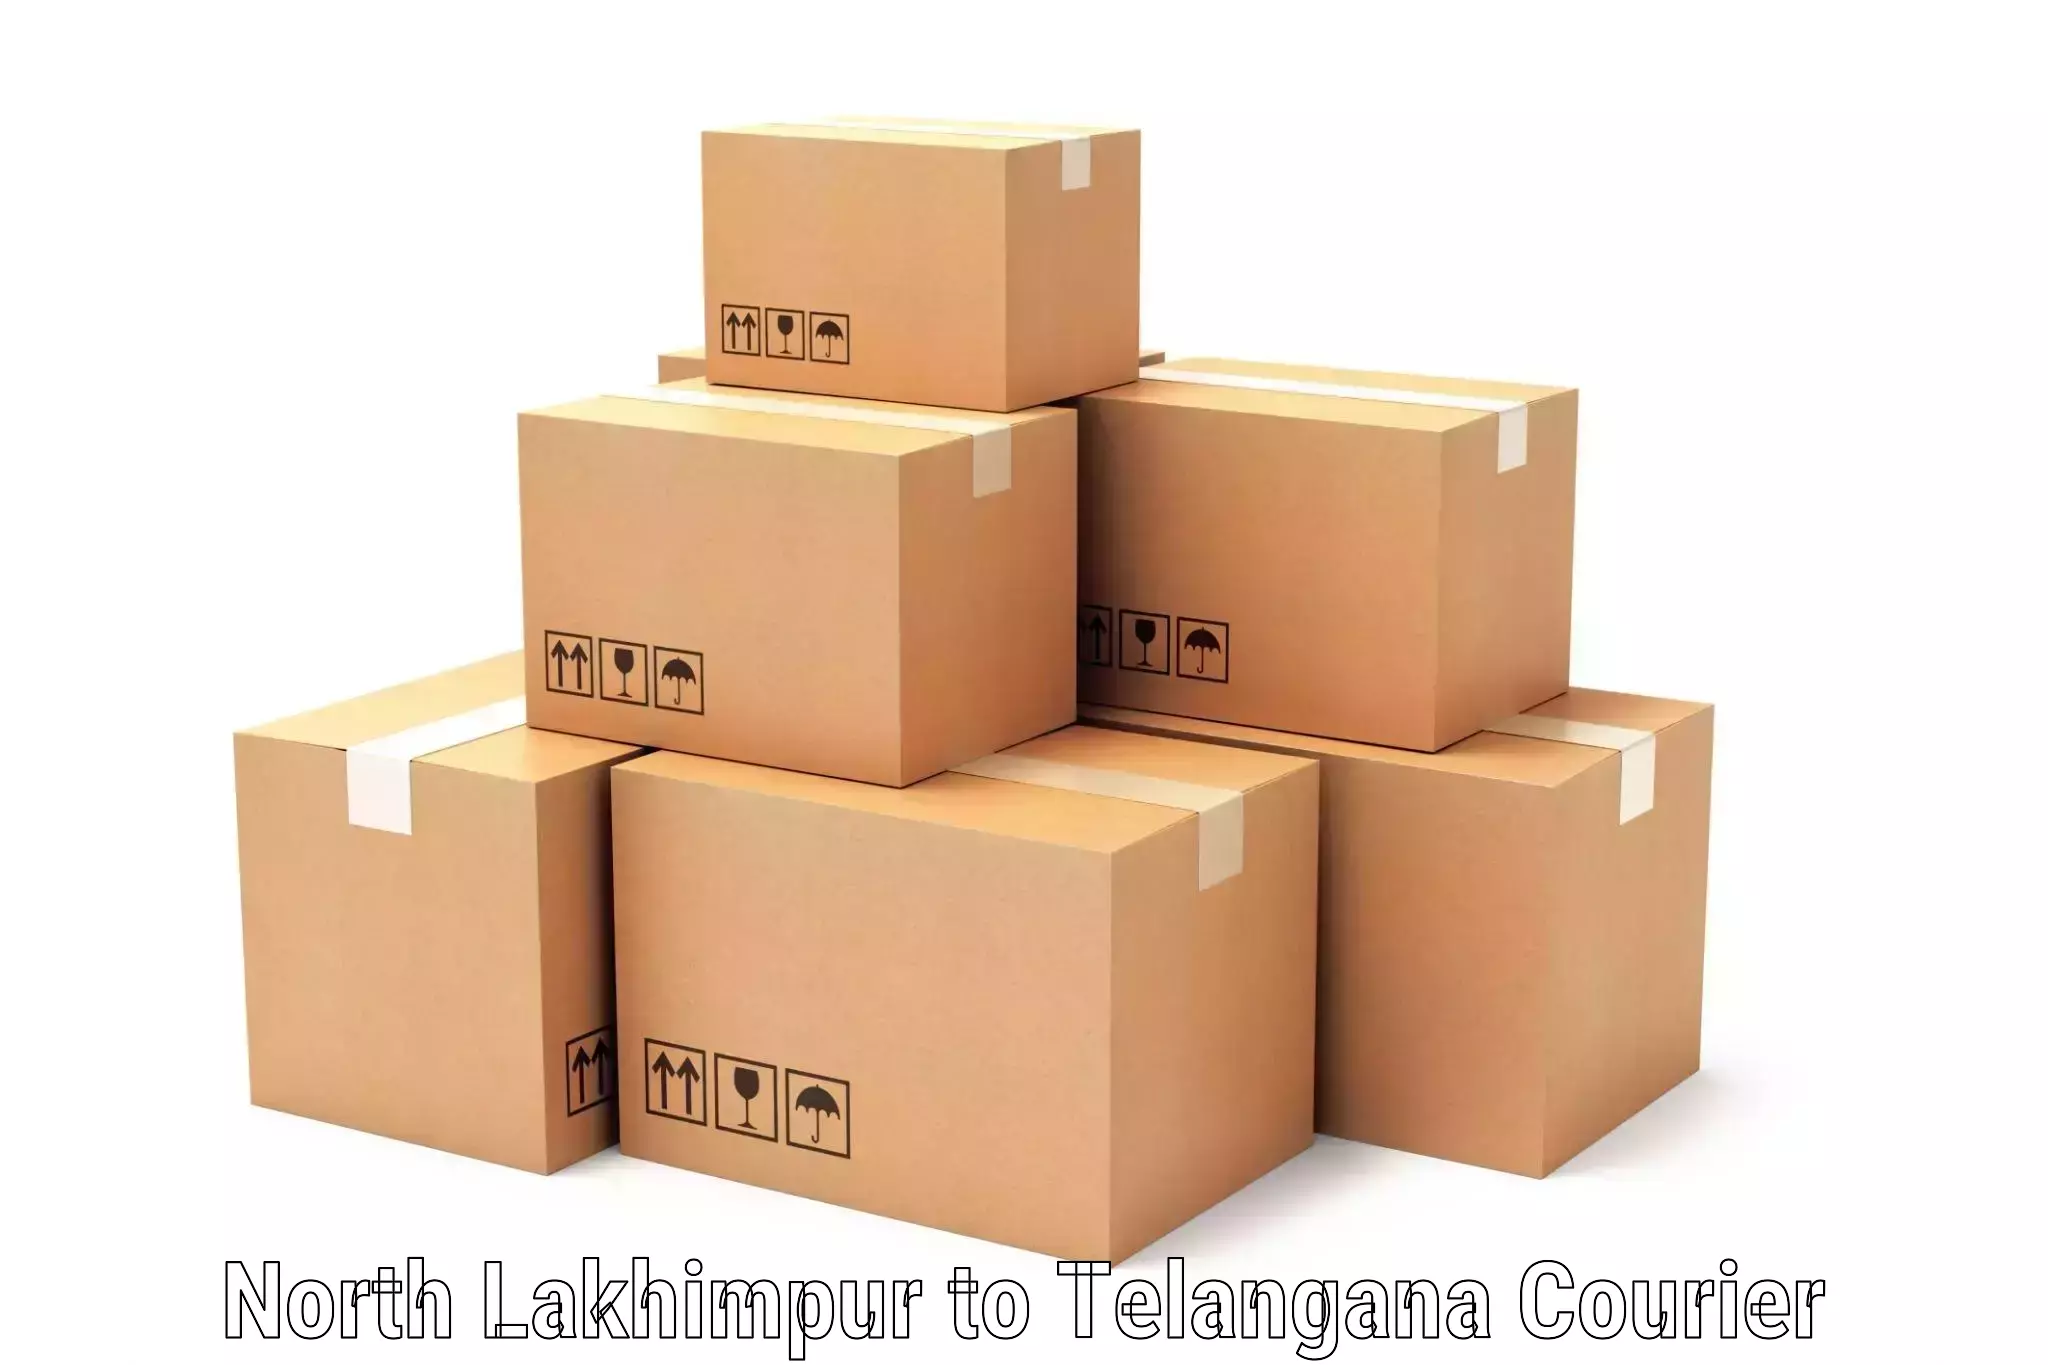 Automated parcel services North Lakhimpur to Trimulgherry